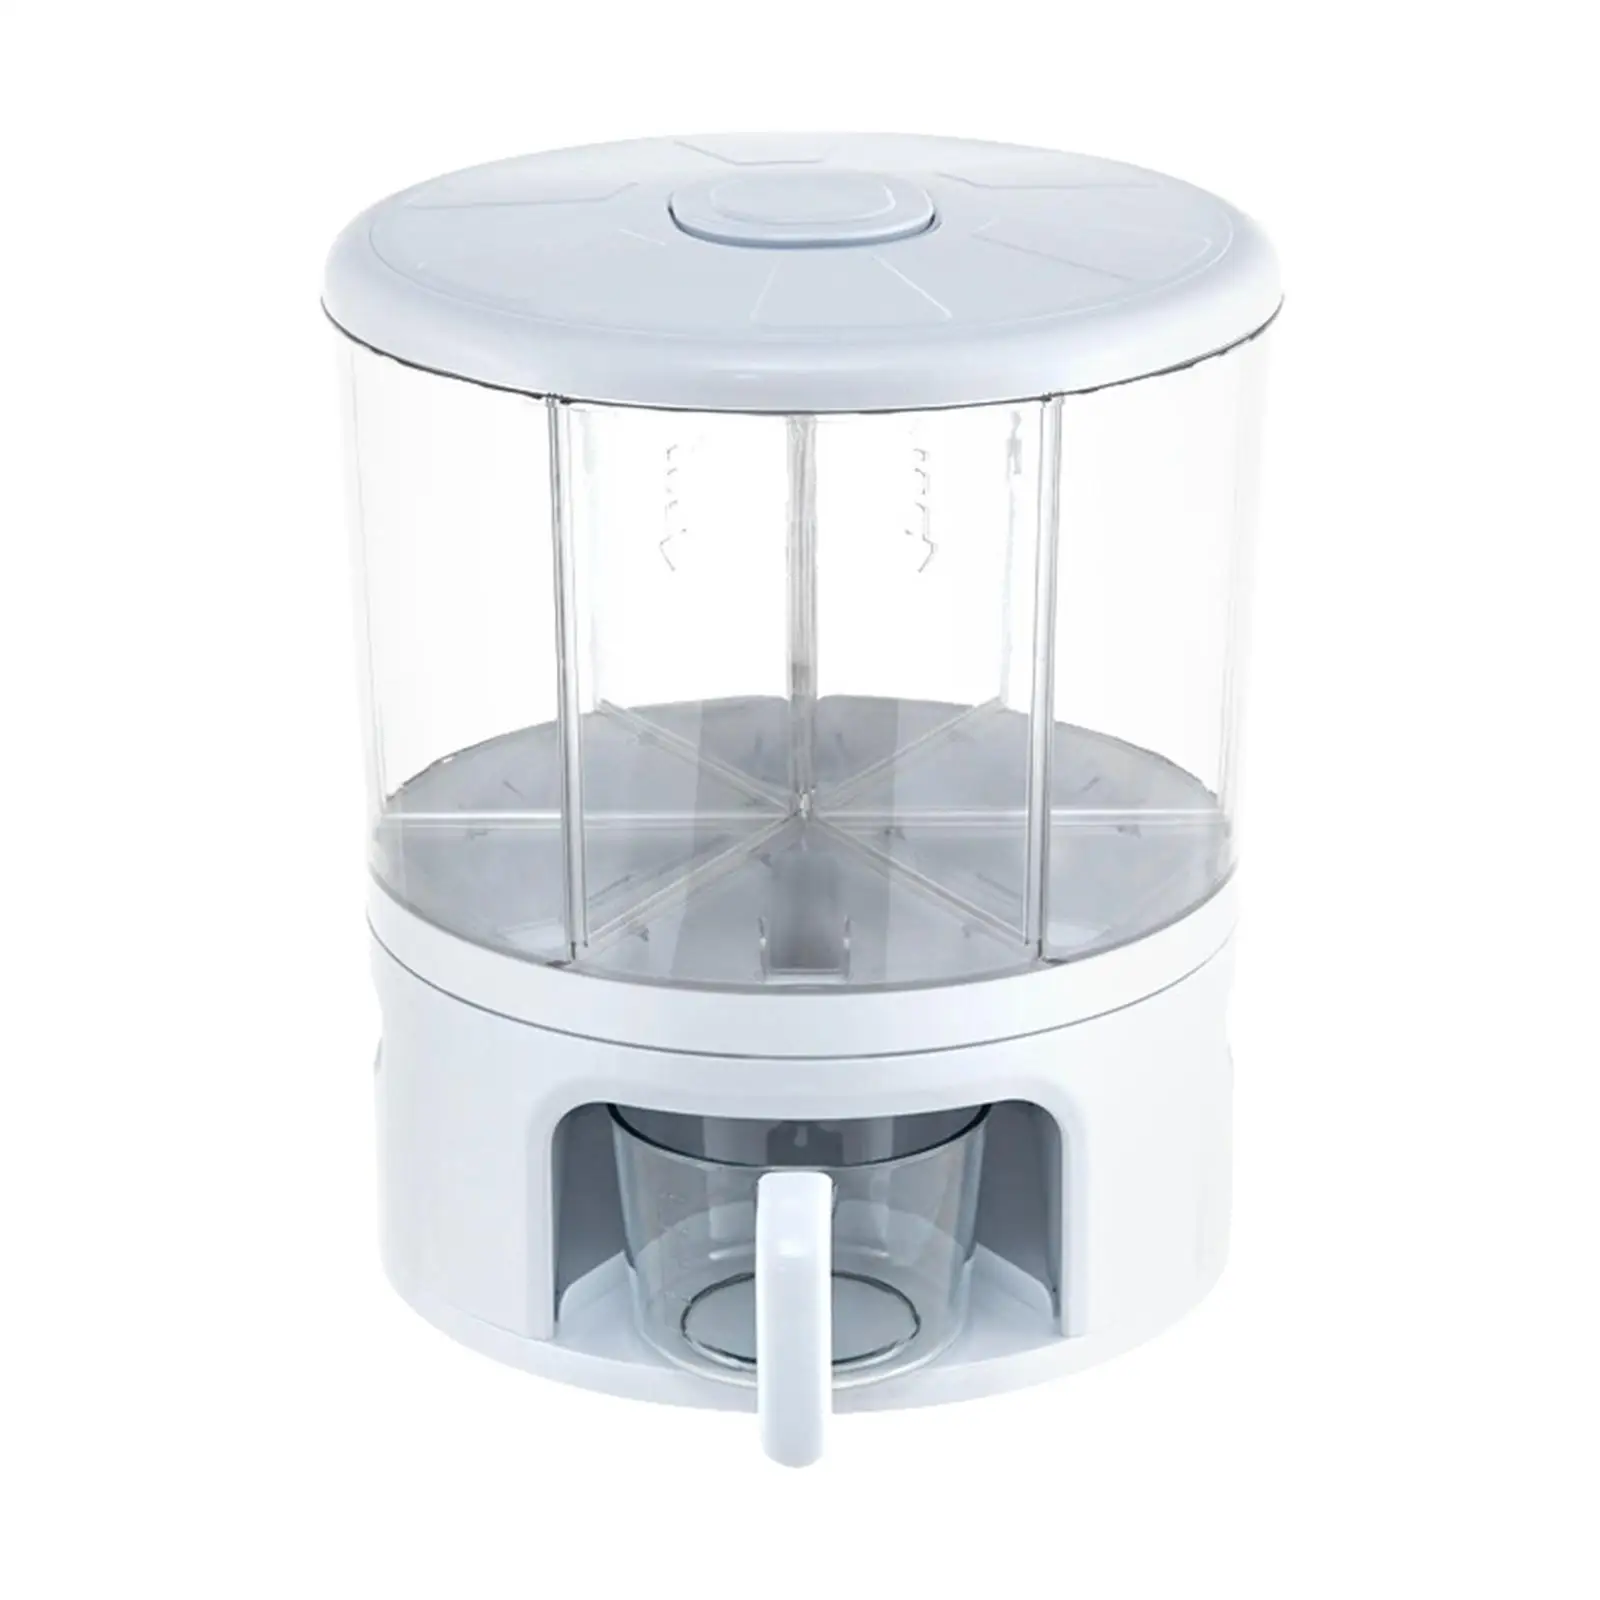 11kg Cereal Dispenser Food Container 360 Rotating Organization Dry Food Storage Box Multifunctional Rice Bucket for Tea Coffee